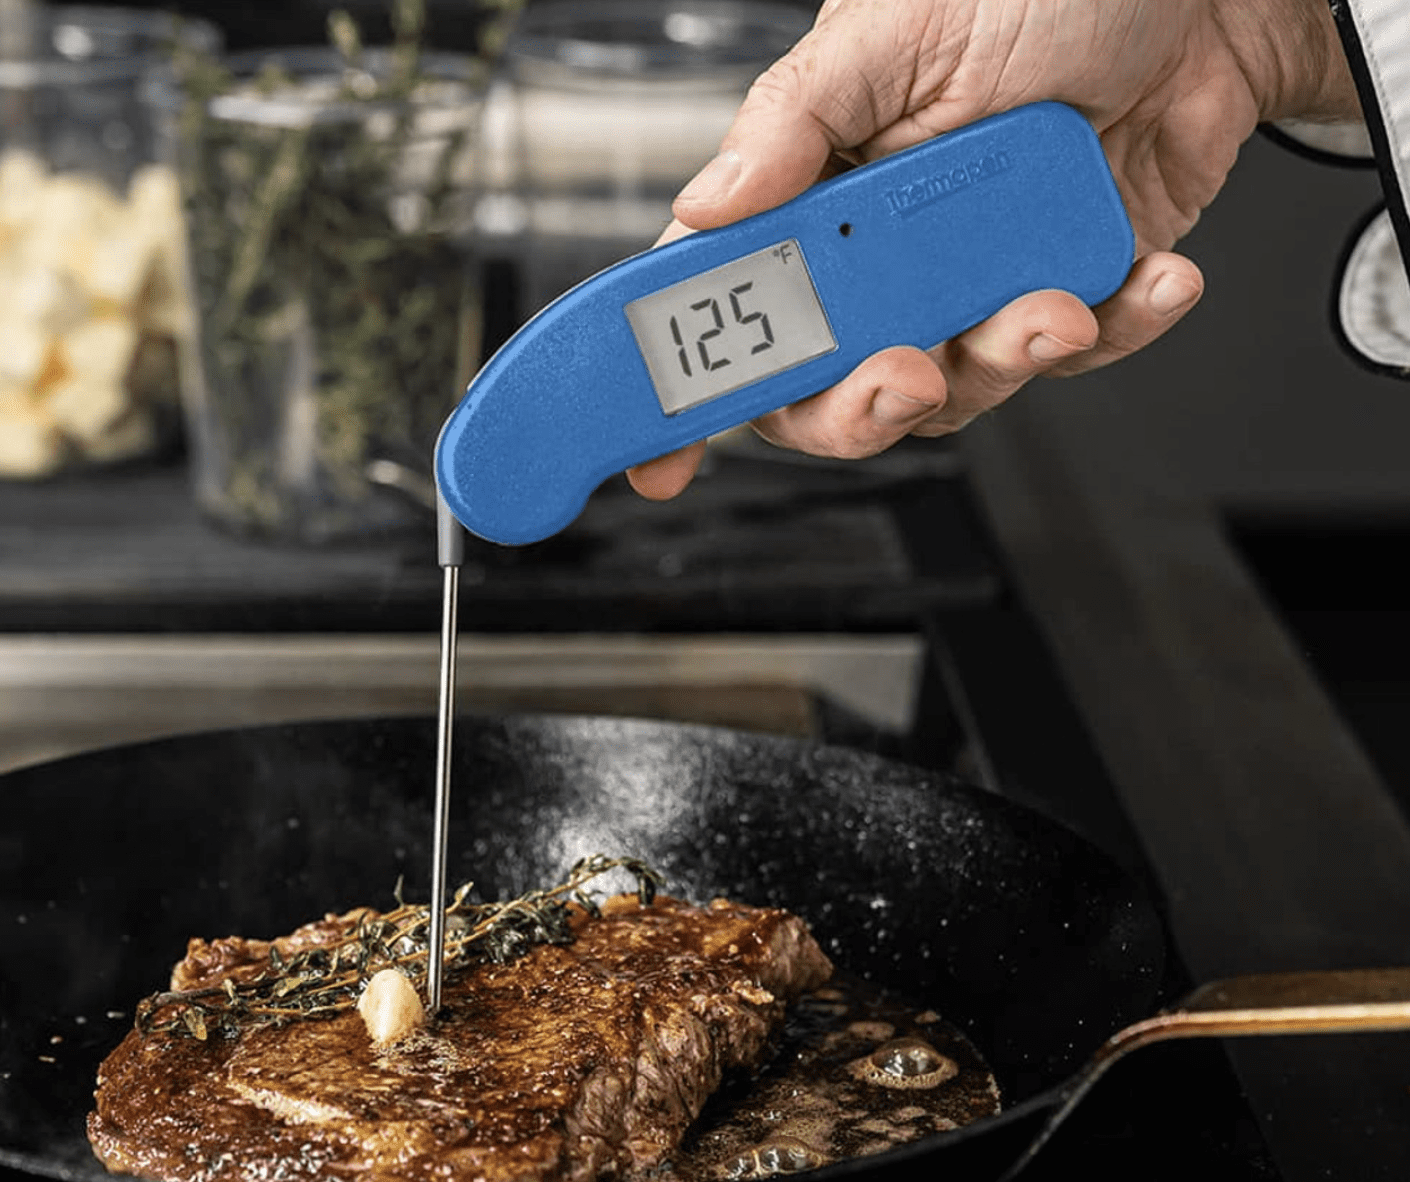 ThermoWorks Thermapen Mk4 Review - King of the Coals